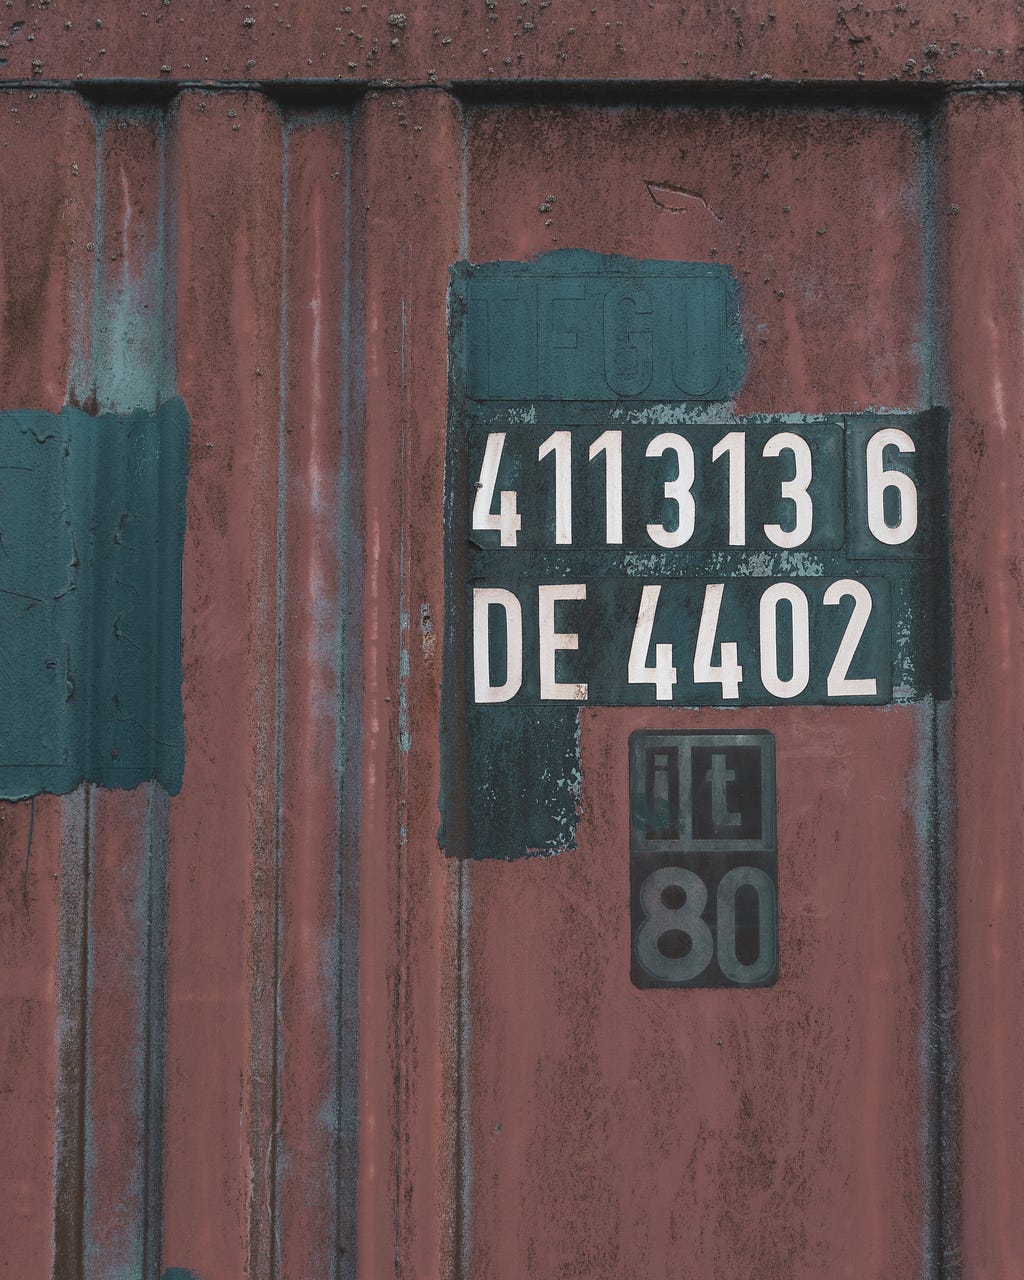 A rusty shipping container